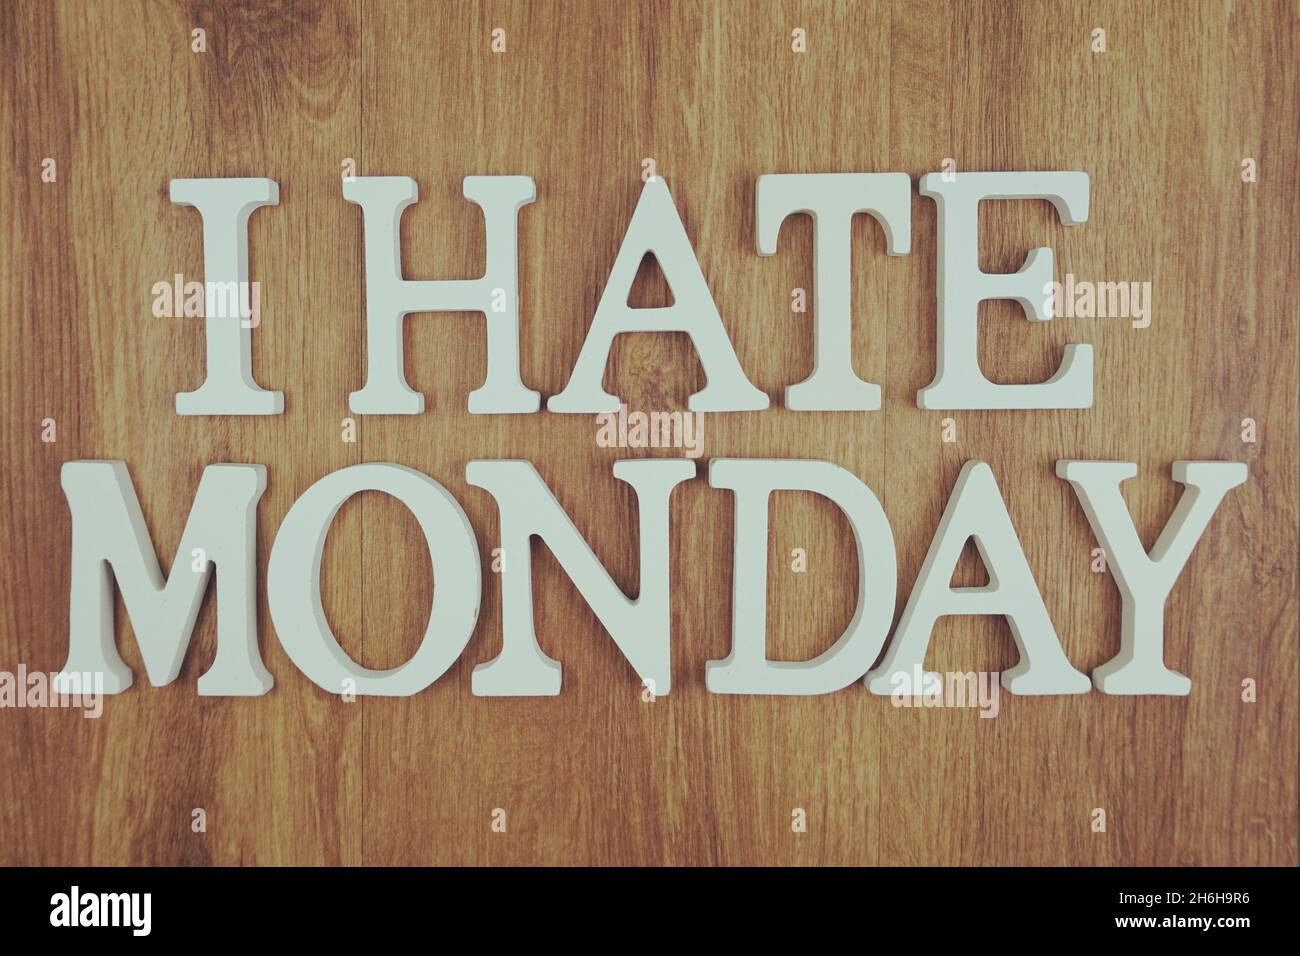 I Hate Monday alphabet letters top view on wooden background Stock Photo